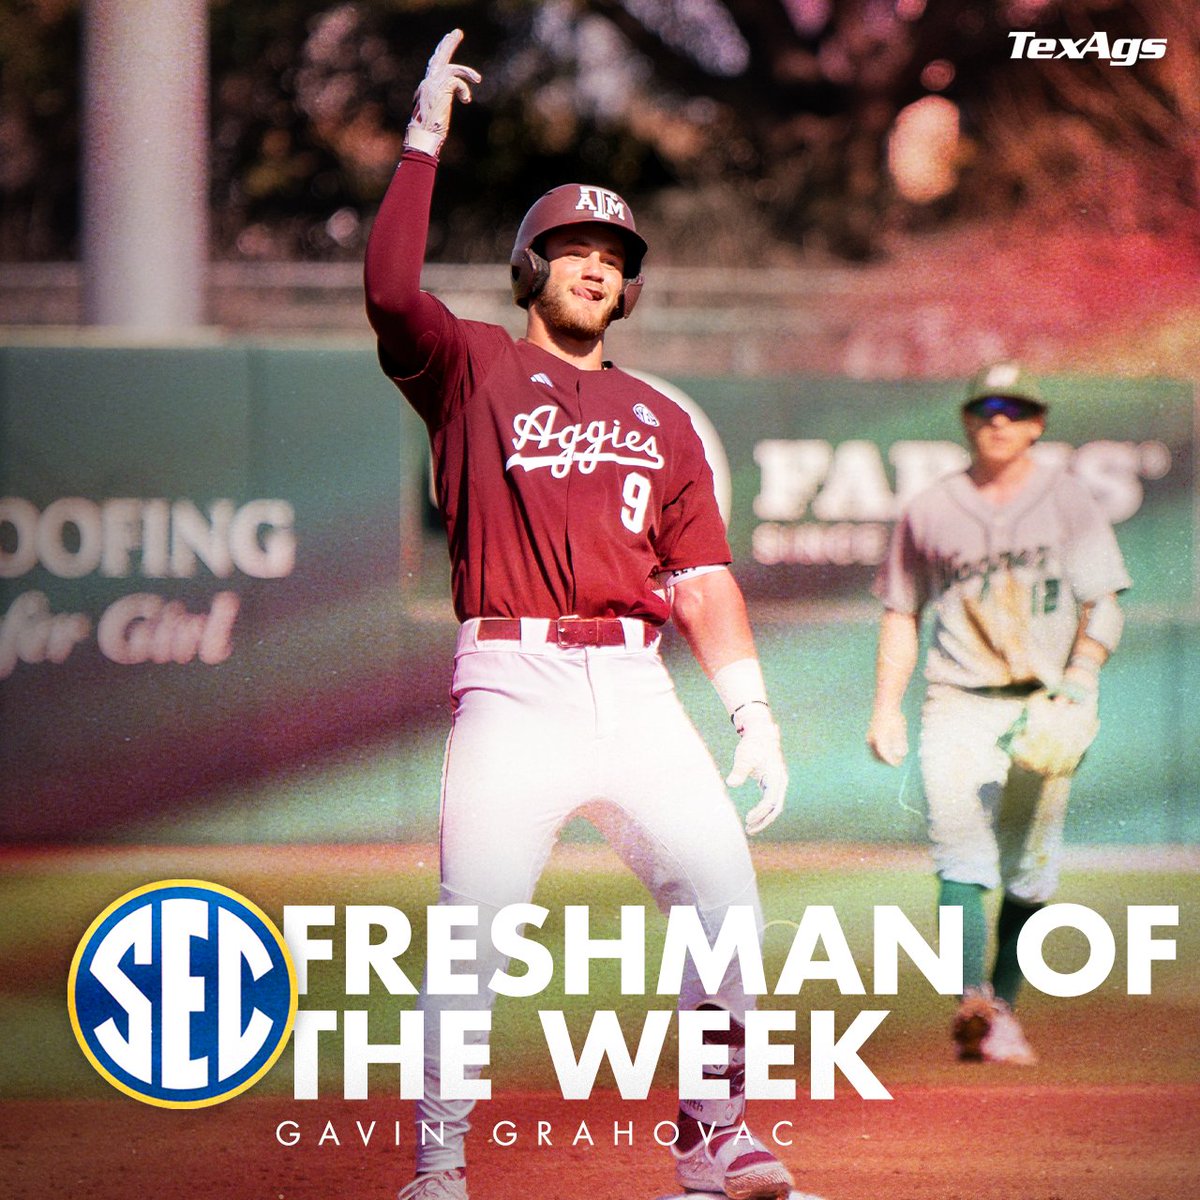 Back to back? Back to back. @GavinGrahovac named SEC Freshman of the Week for the second week in a row 👍 #Good.